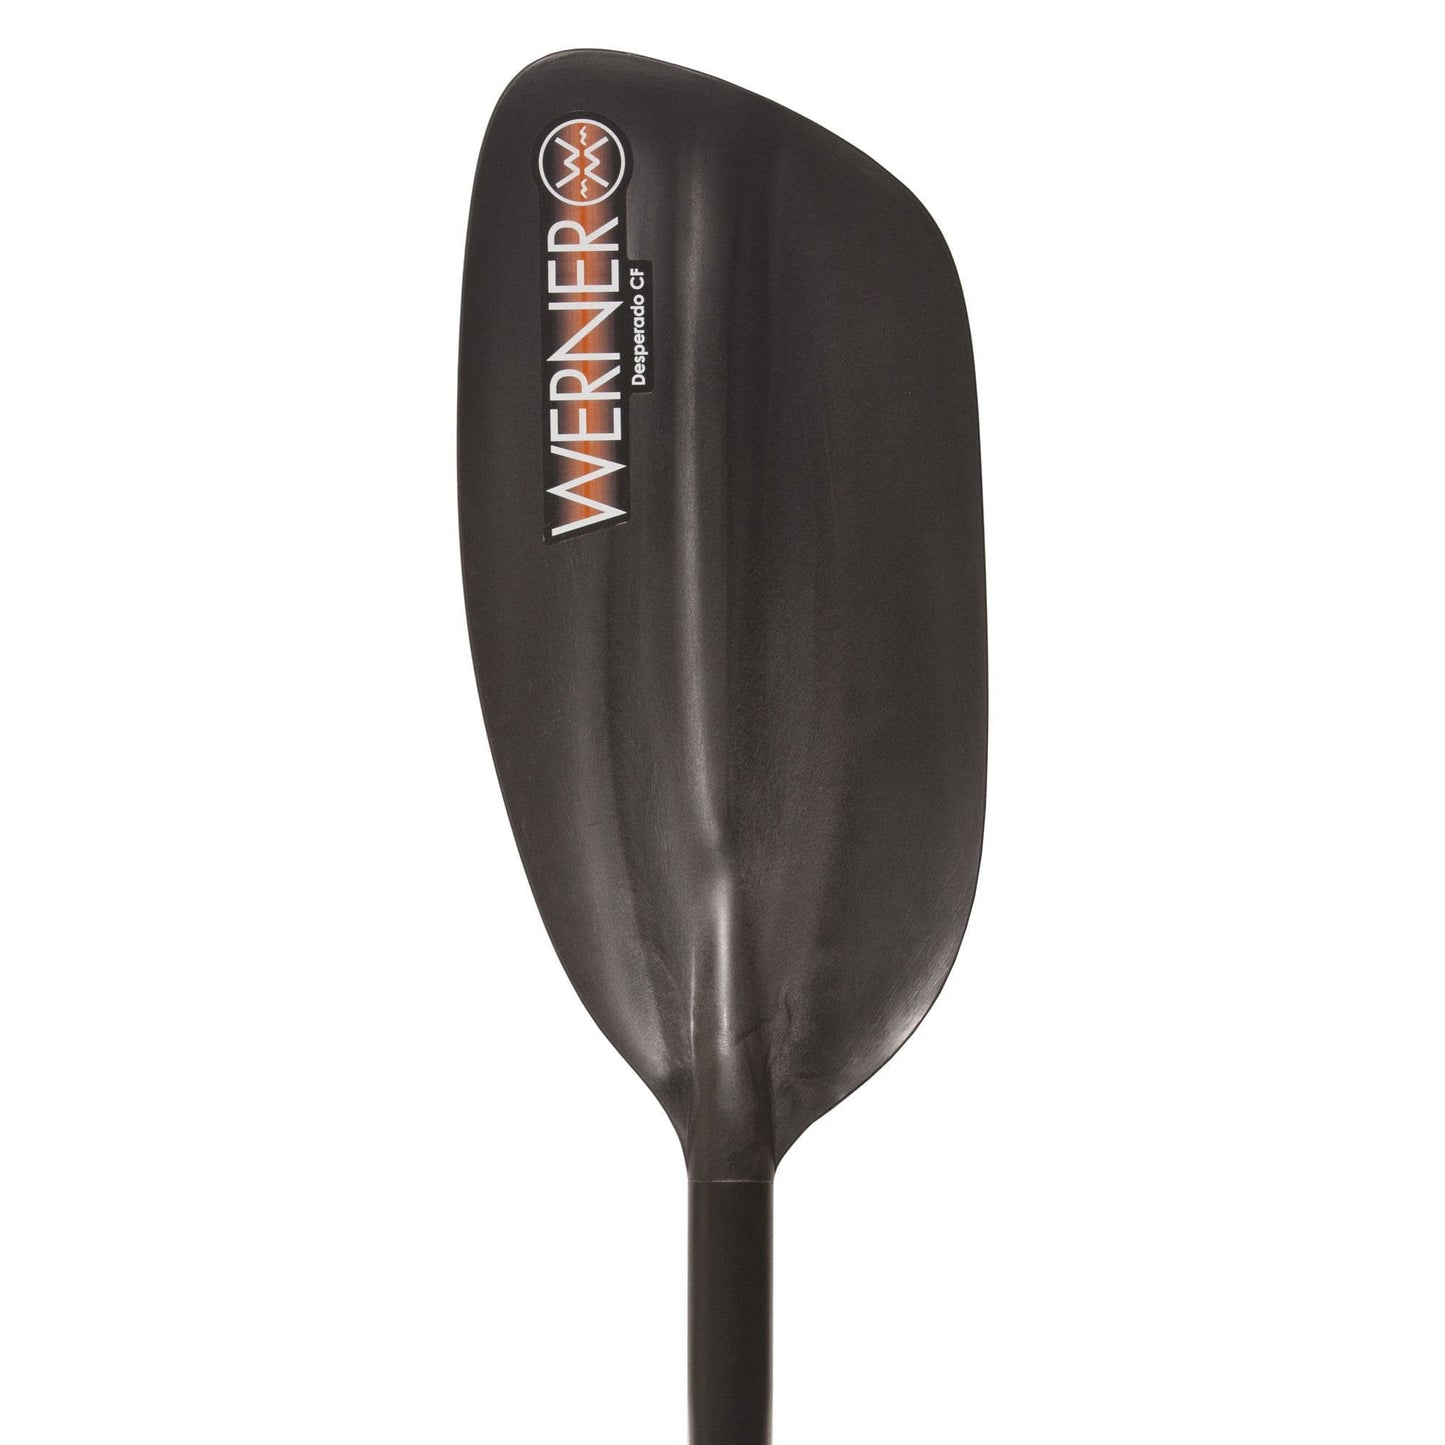 Featuring the Desperado 2-Piece Paddle ik paddle manufactured by Werner shown here from one angle.